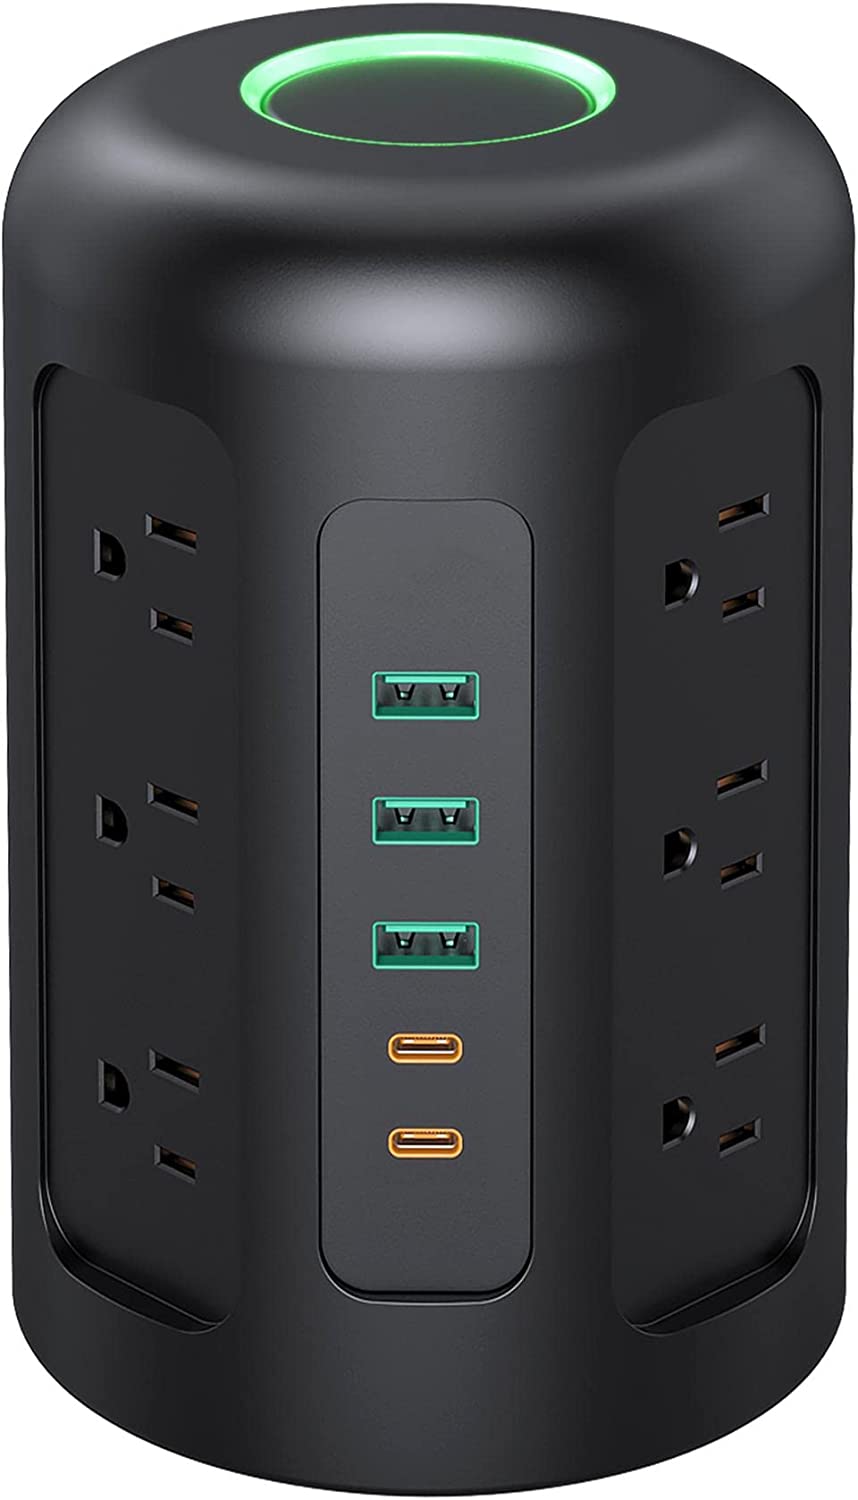 SmartTechShopping charger socket 12 * AC + 3 * USB-A + 2 * USB-C Black Power Strip Tower With 12 Widely Spaced AC Multiple Outlets & 6 USB Ports for Phones